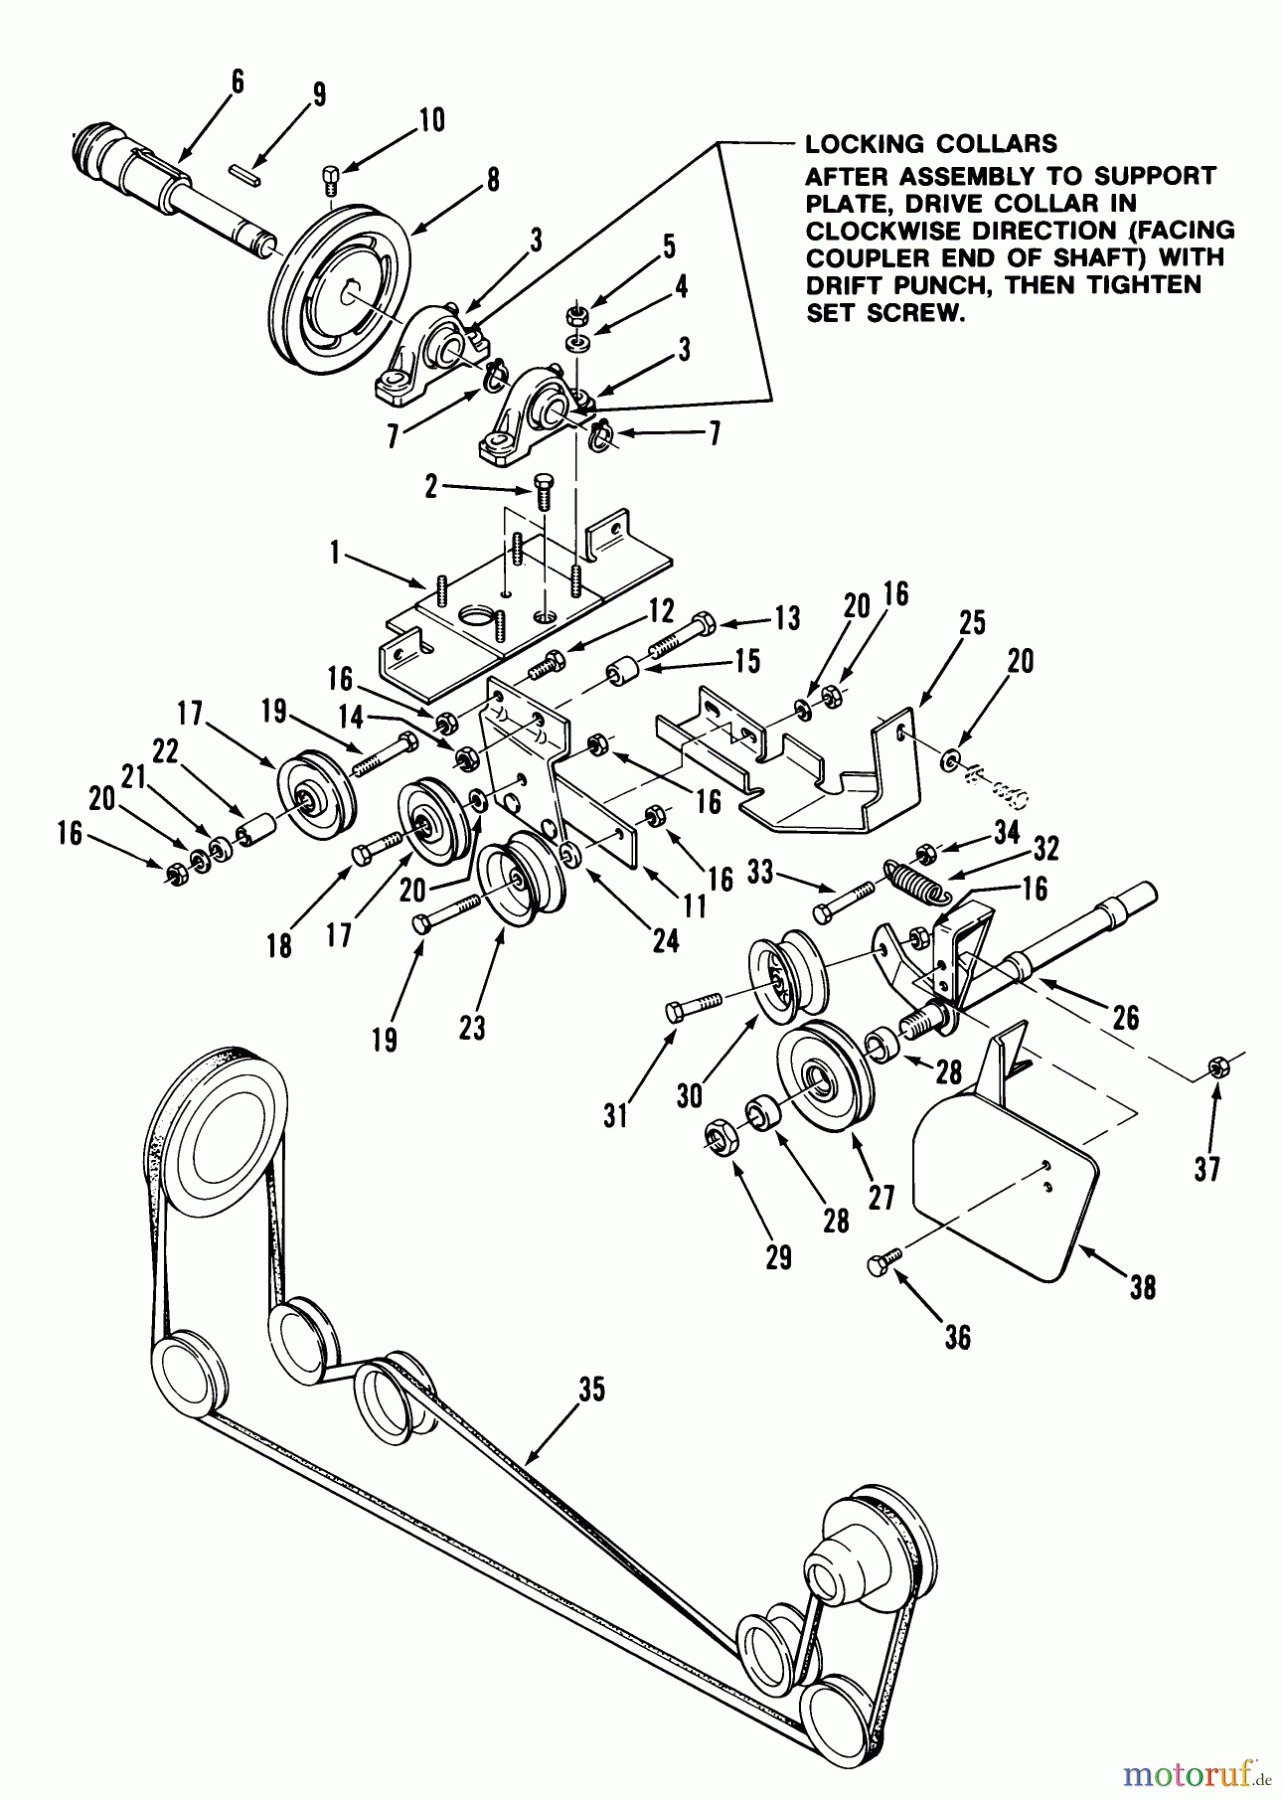  Toro Neu Accessories 83231 - Toro Rear PTO, 1982 PARTS LIST FOR REAR PTO FACTORY ORDER NUMBER 8-3231